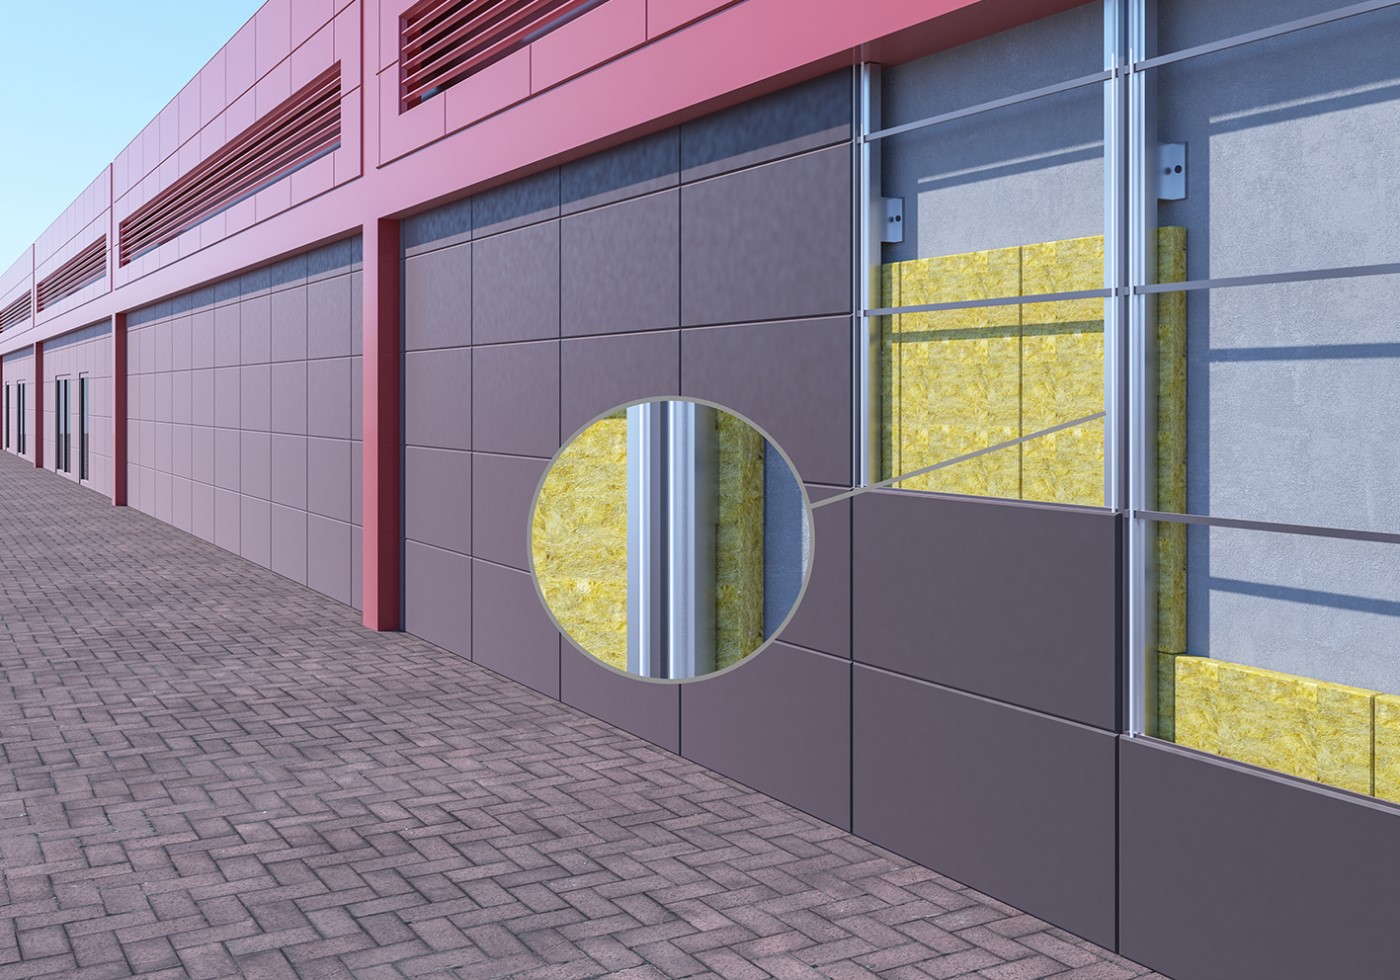 Curtain Wall Ceramic Tile Application Solutions